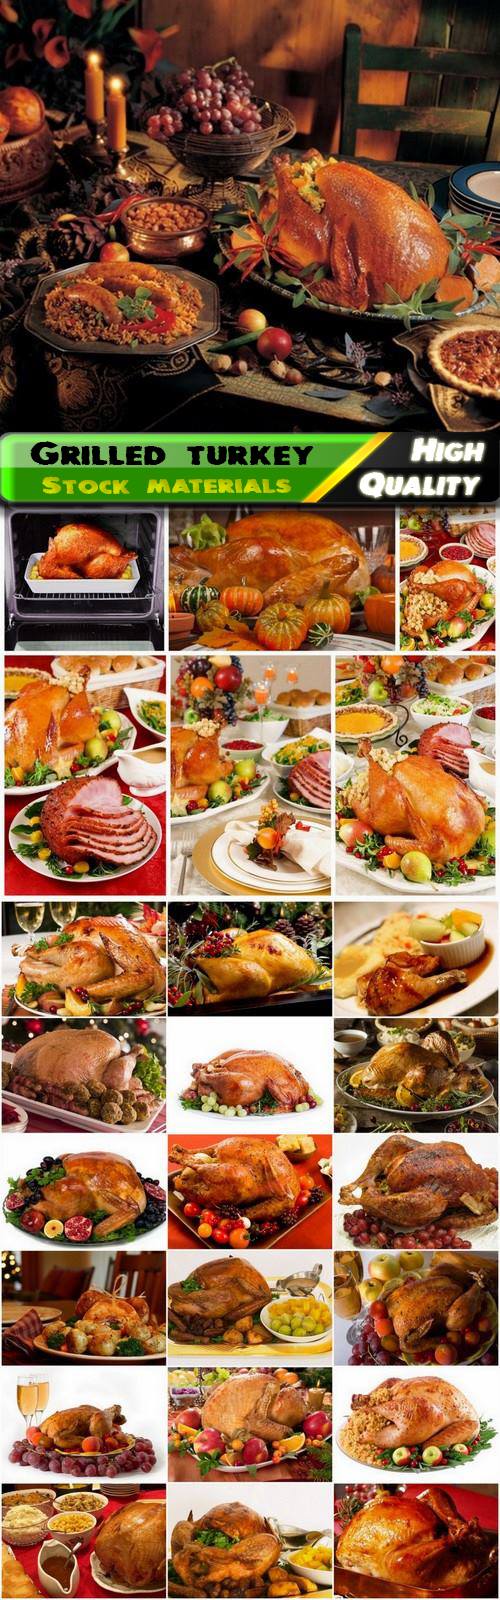 Grilled turkey for Christmas with garnish - 25 HQ Jpg